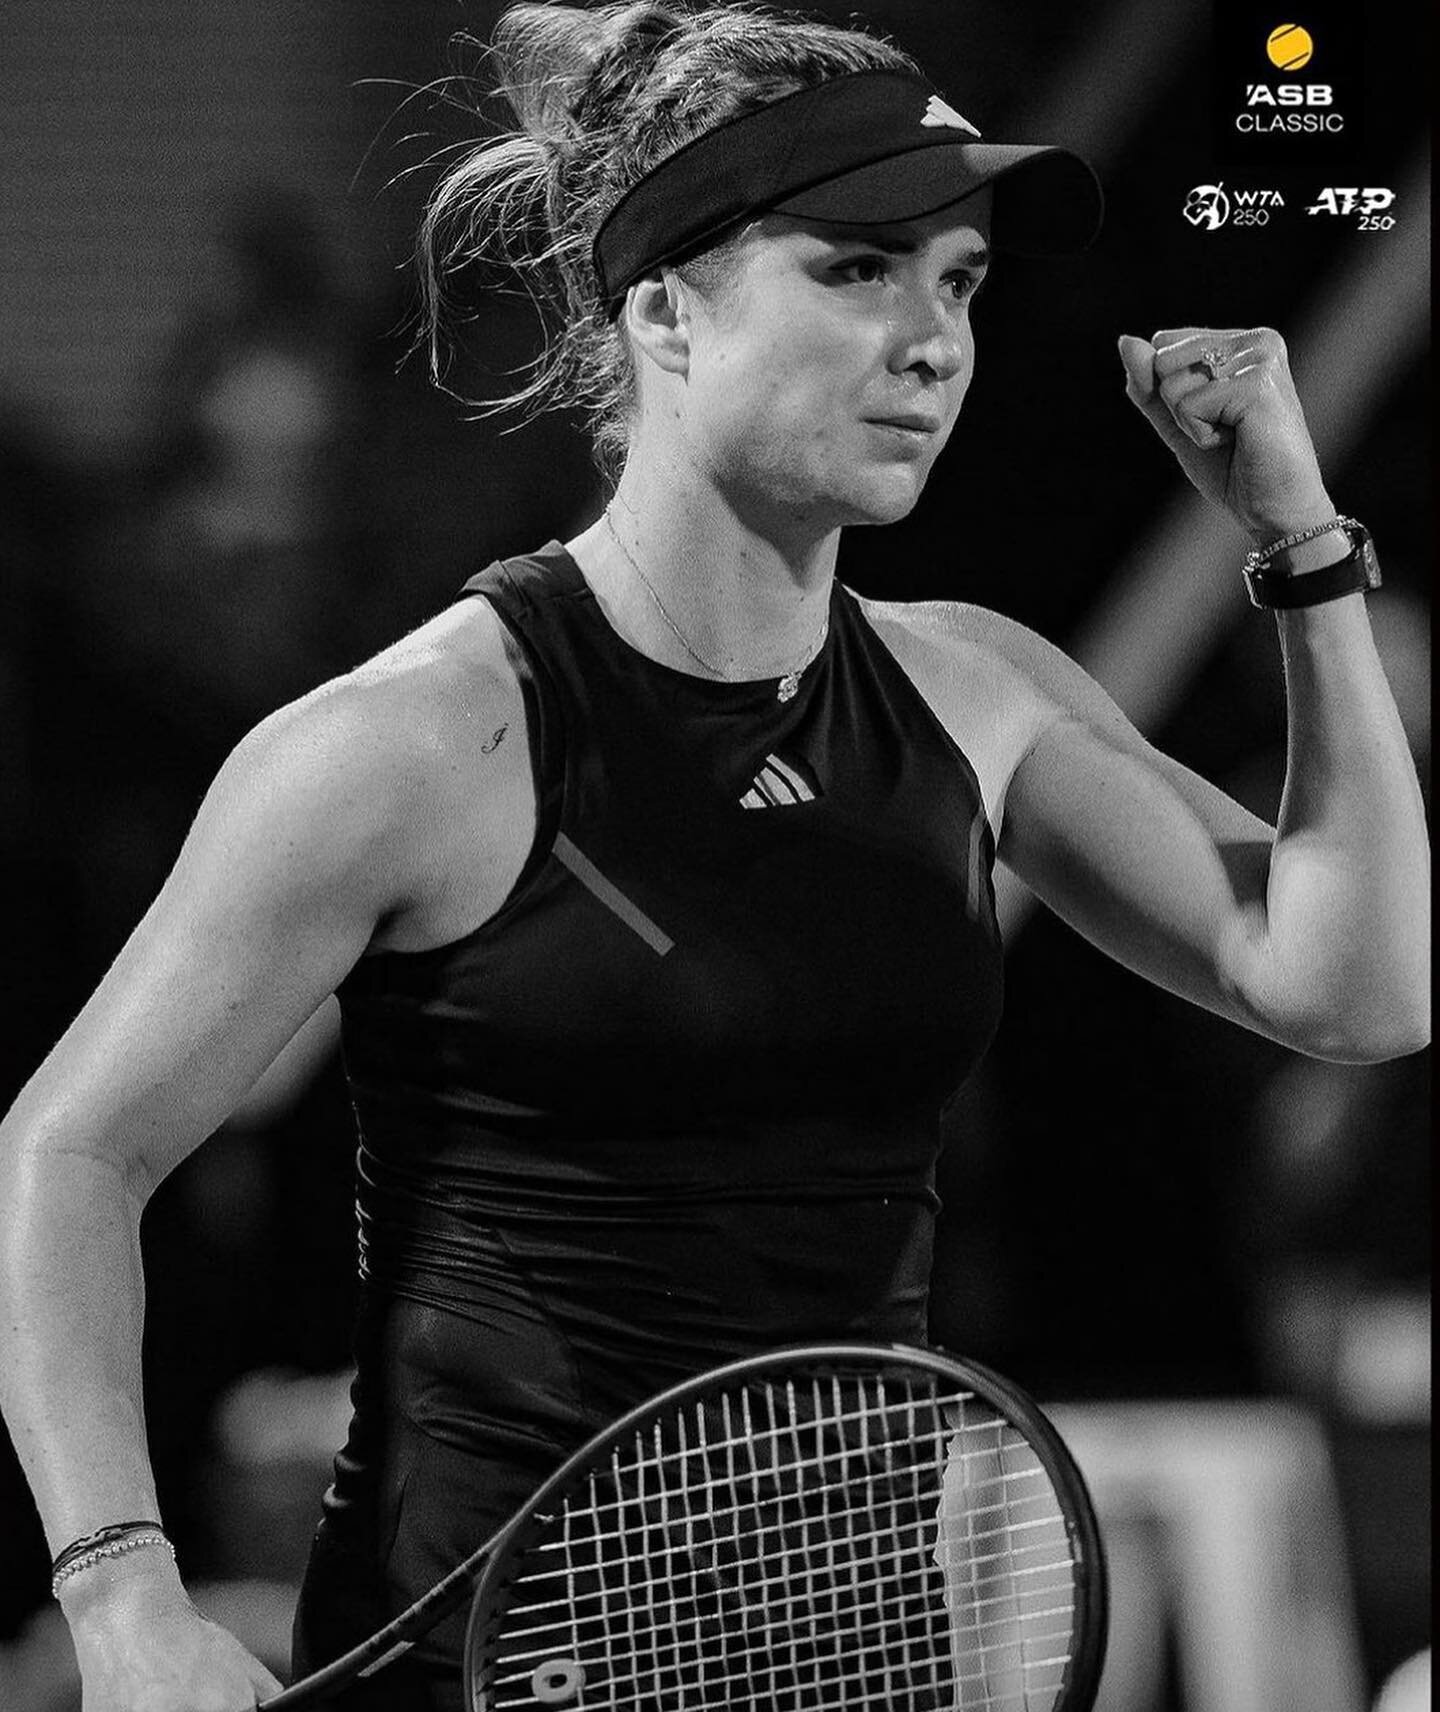 An incredibly impressive week from the incredibly impressive @elisvitolina 
reaching the final of the @asbclassic  in the first event of 2024 but also your first event in nearly 5 months.

We are all so proud of you and can not to wait to see what yo